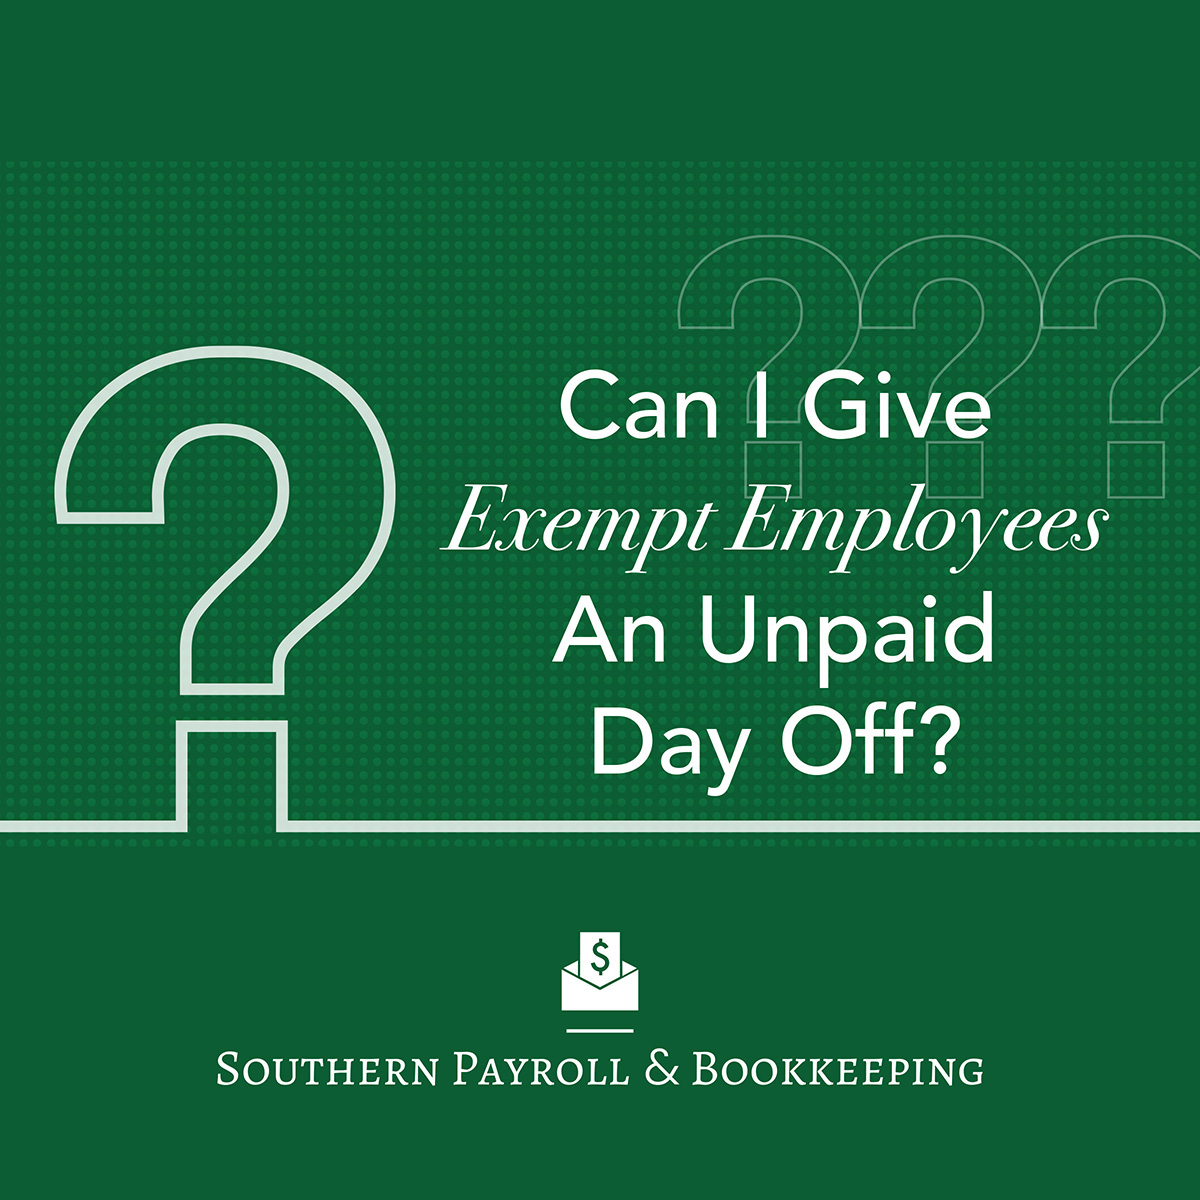 CAN I GIVE EXEMPT EMPLOYEES AN UNPAID DAY OFF?